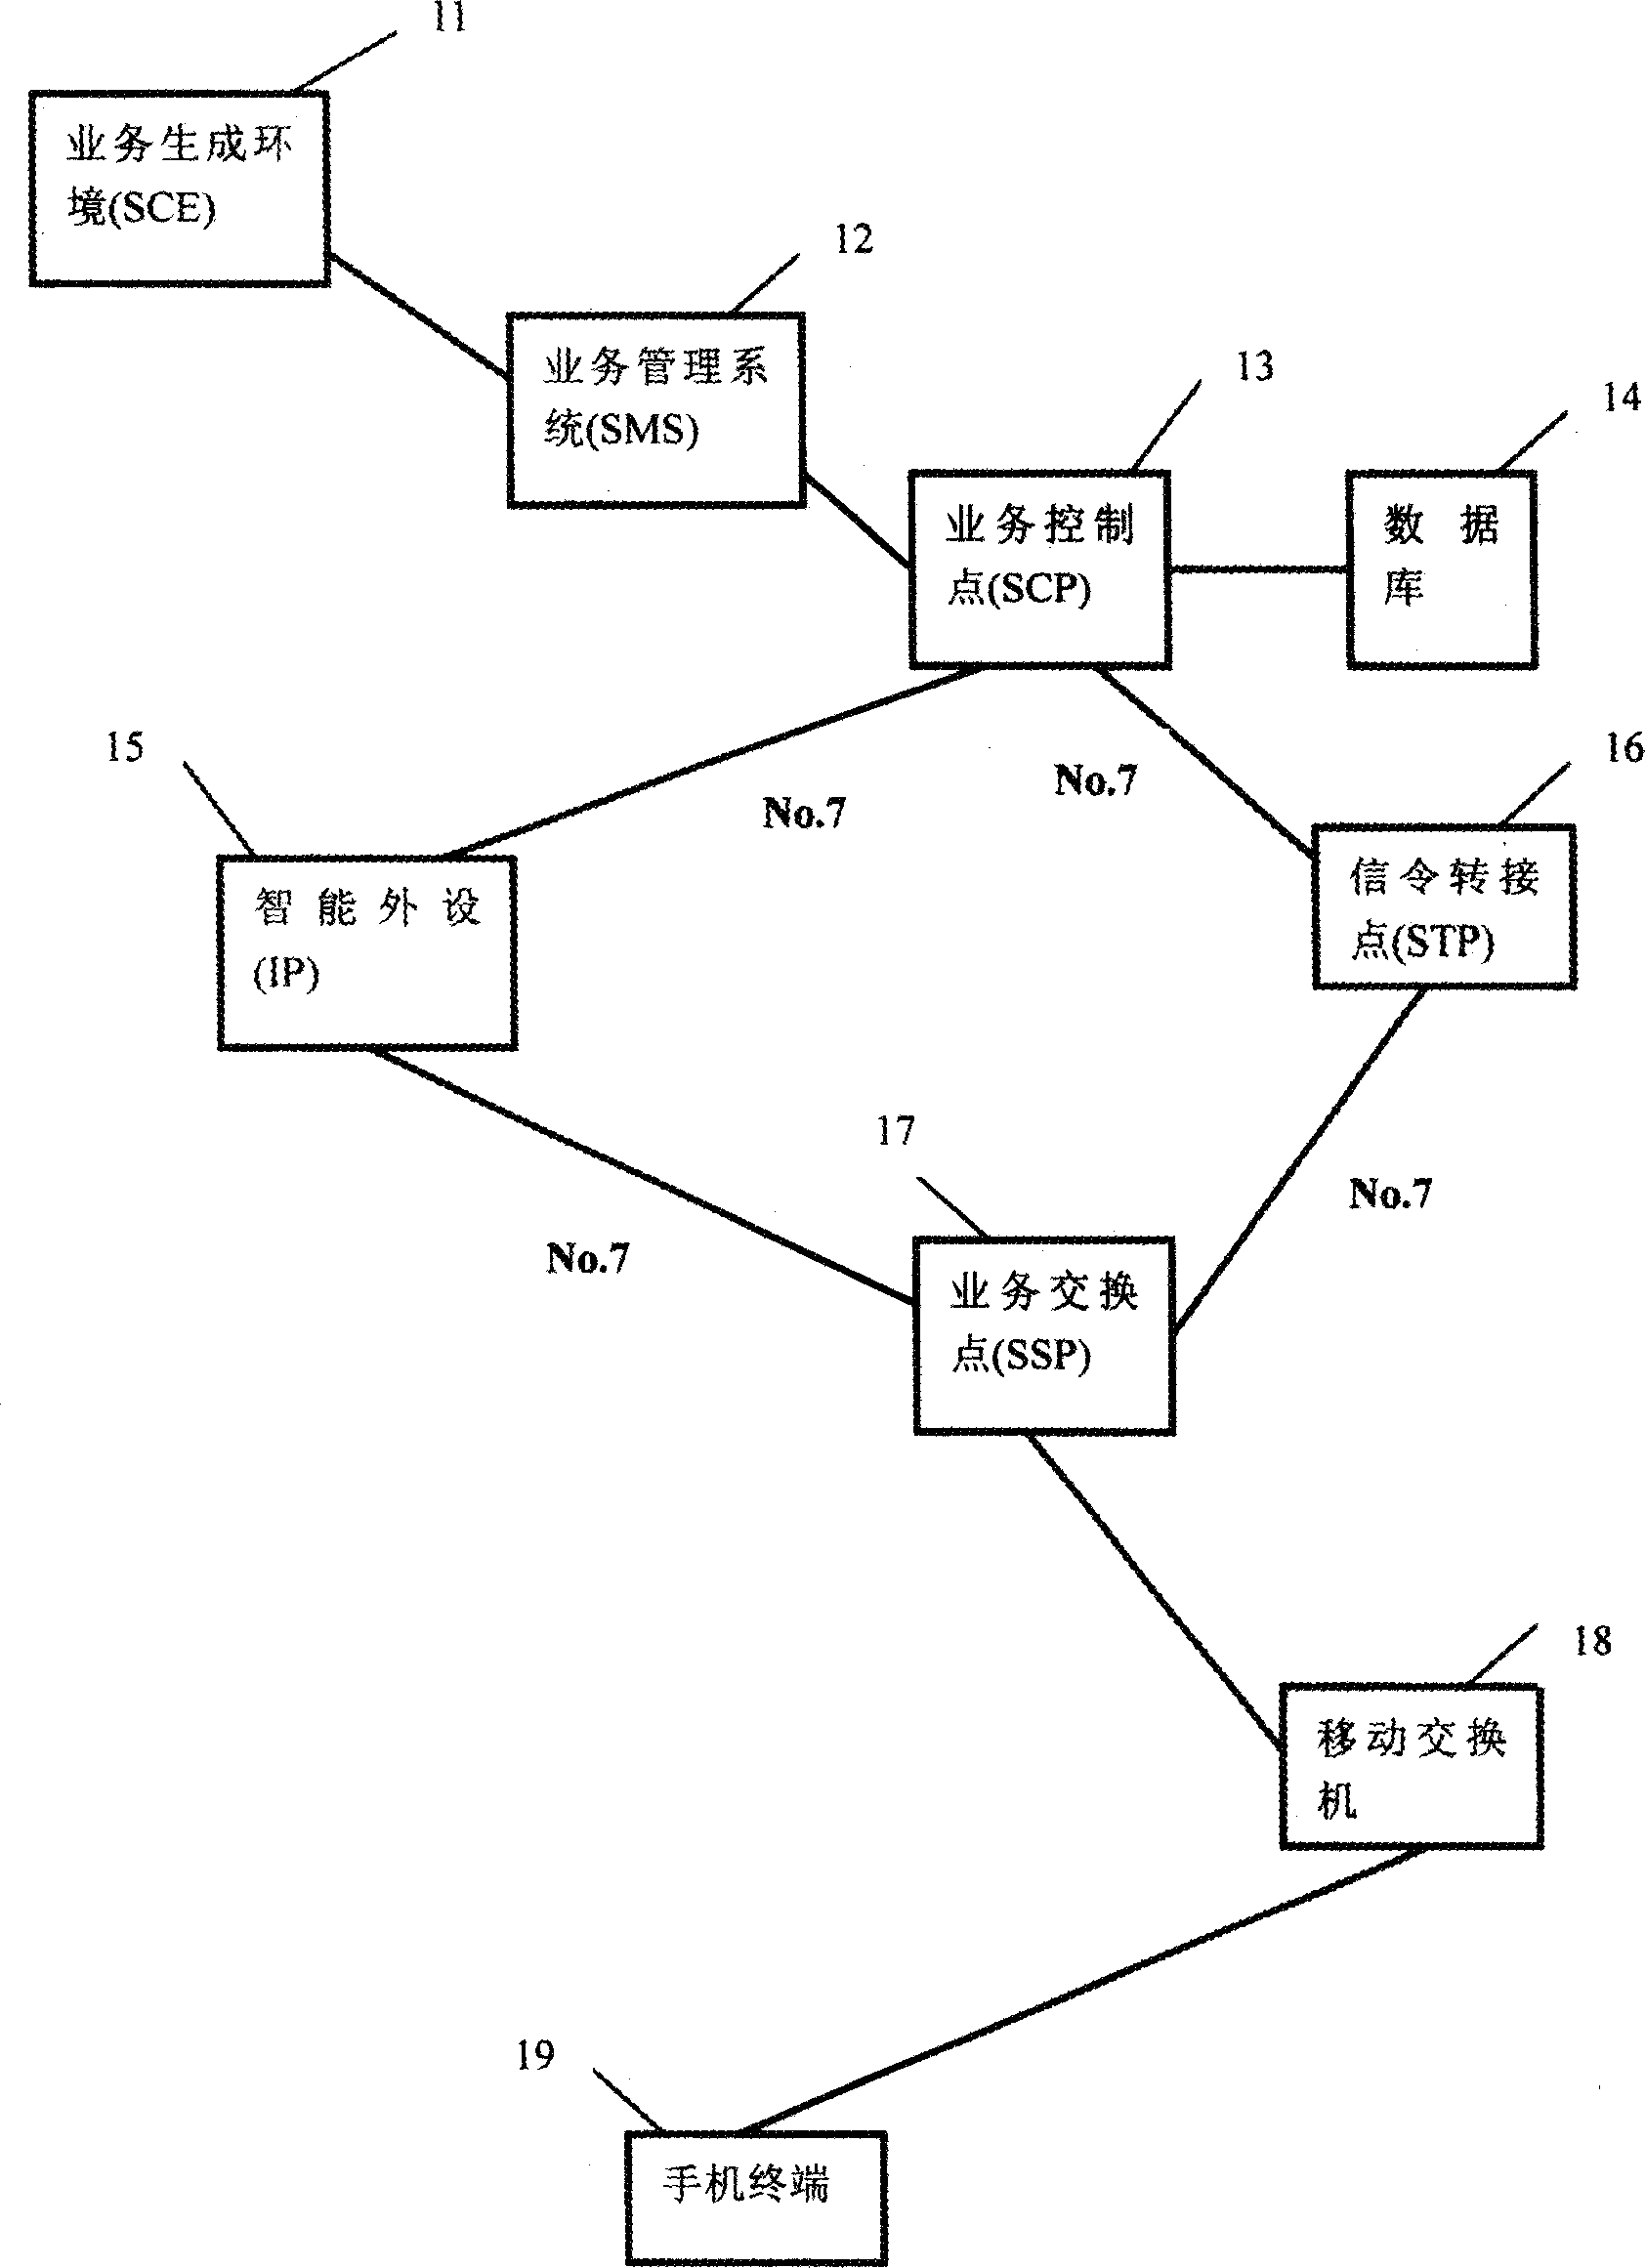 Method for realizing lottery ticket operation in intelligent network by mobile telephone set